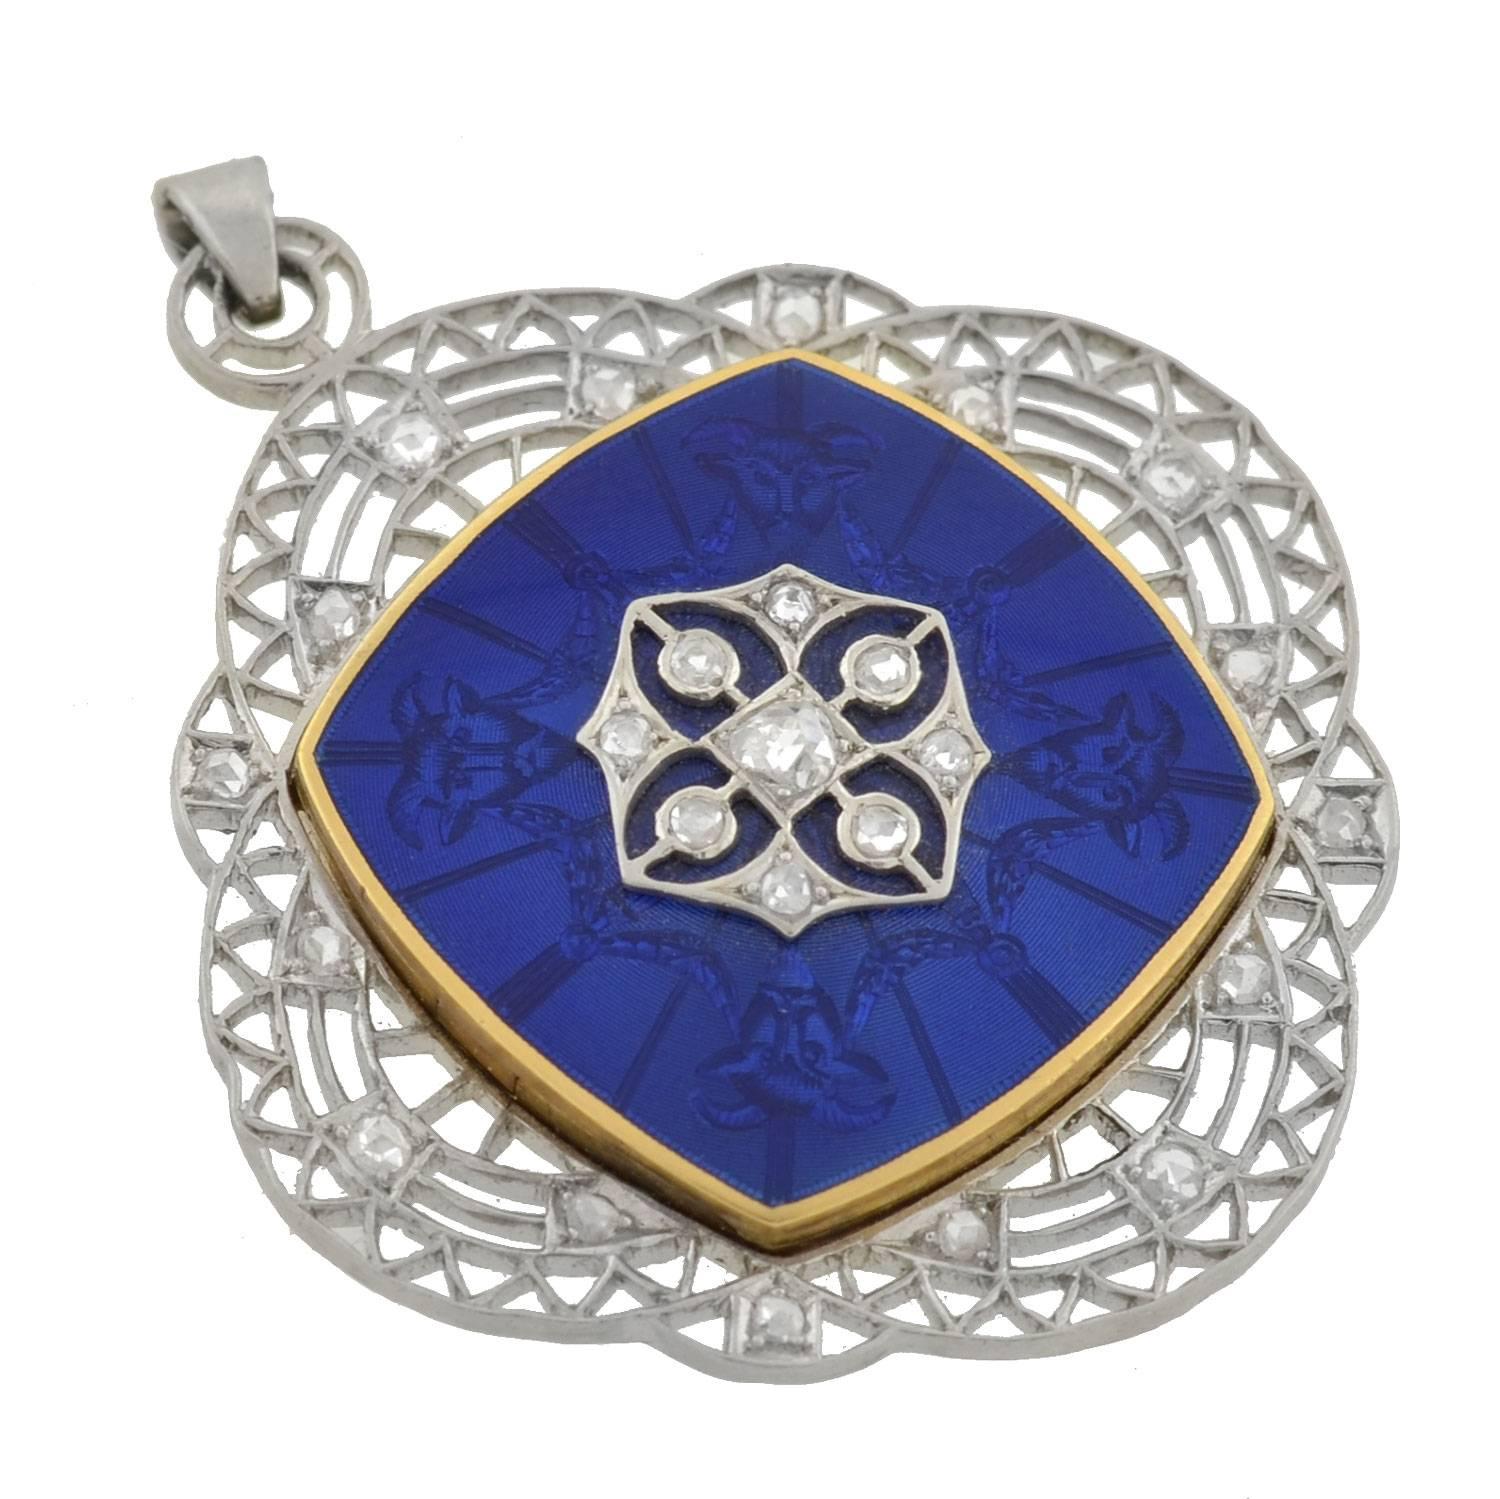 A simply magnificent Edwardian era (ca1910) piece with a fabulous and subtle detail! This locket has a stunning double-sided enameled surface with a very intricate and detailed design etched beneath it. The enamel center is set in 14kt yellow gold